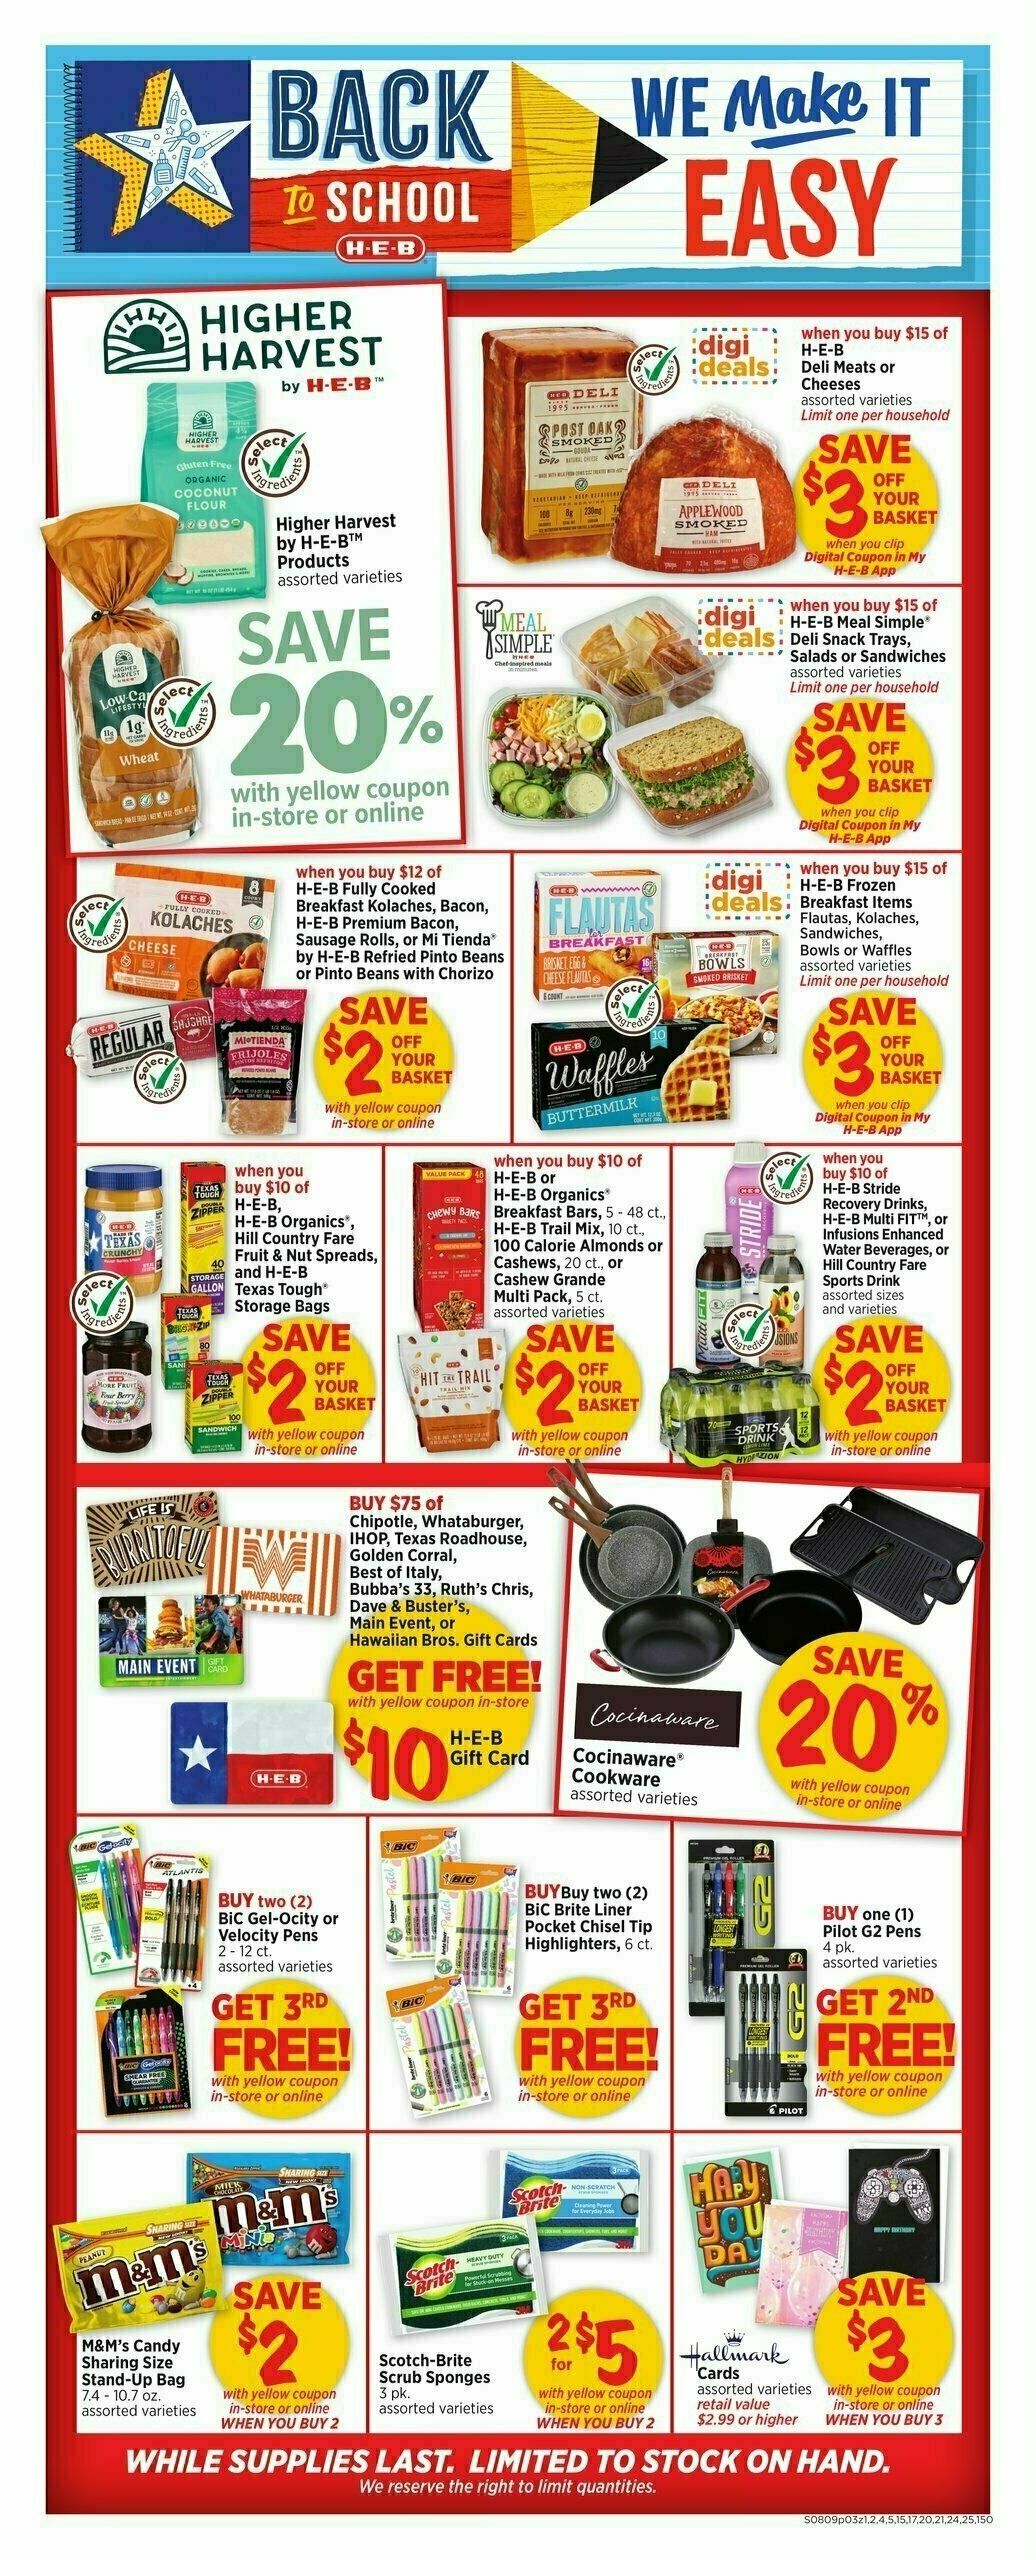 H-E-B Weekly Ad from August 9